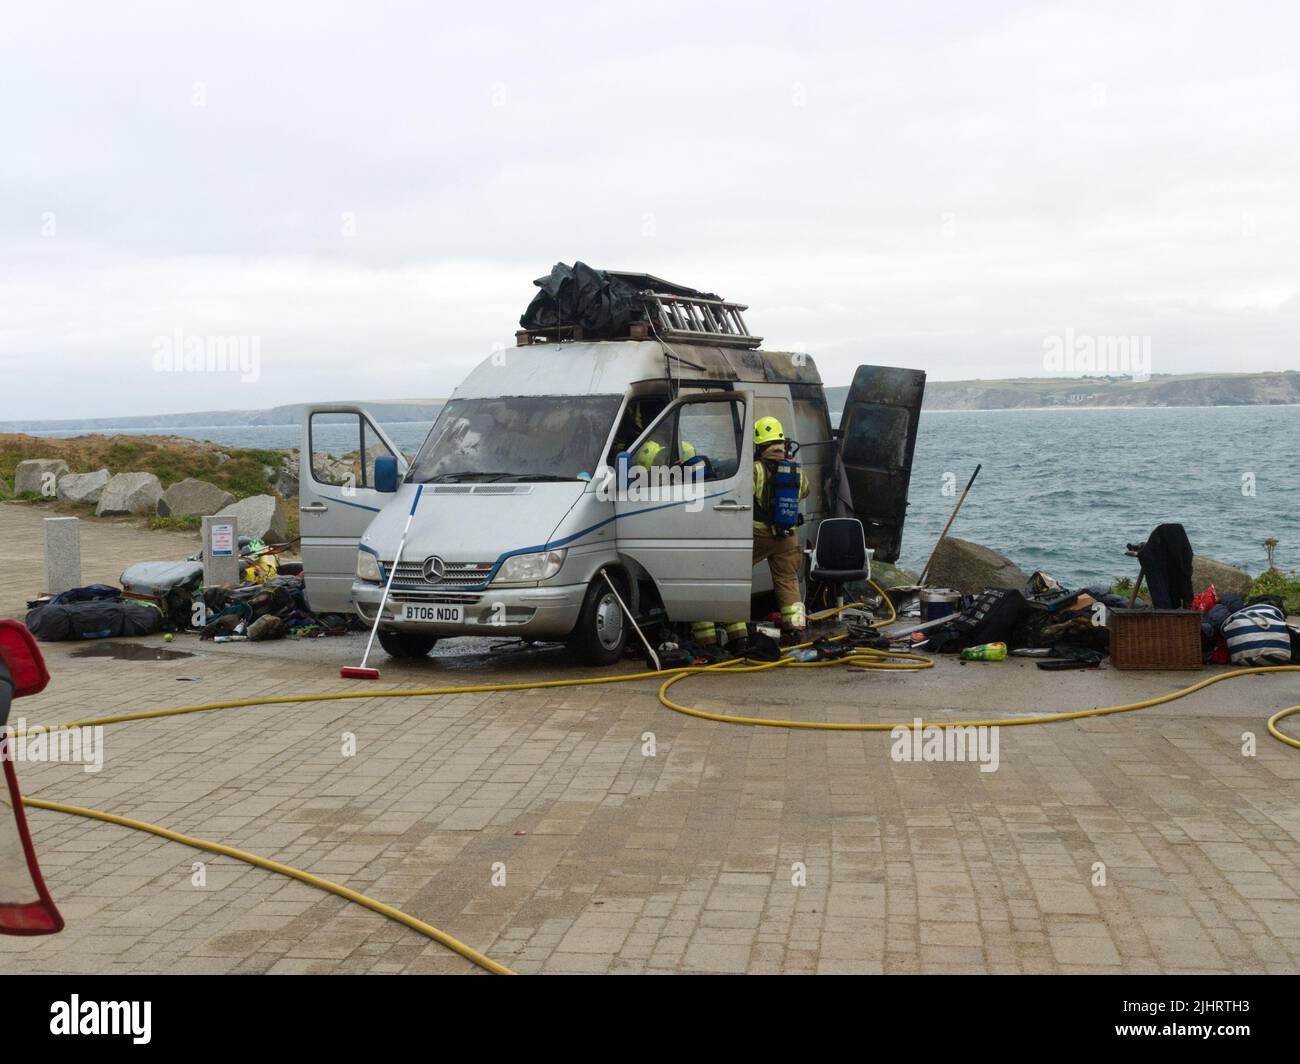 Newquay, Cornwall, UK. 20 July, 2022. Spoke-person for Van campers in a Cornish Car park dispute made claim of threats on his life in Truro magistrates court, hours later his van was engulfed by fire. Retired Army Captain Peter Elliot who saw service in Northern Ireland elected to speak up in Truro Magistrates court  court today to challenge an attempt to evict some 49 Campers and van dwellers. The Camper folk had been served with Criminal Justice and Public order 1994 (Section 27) notices to move on. Credit: Robert Taylor/Alamy Live News Stock Photo